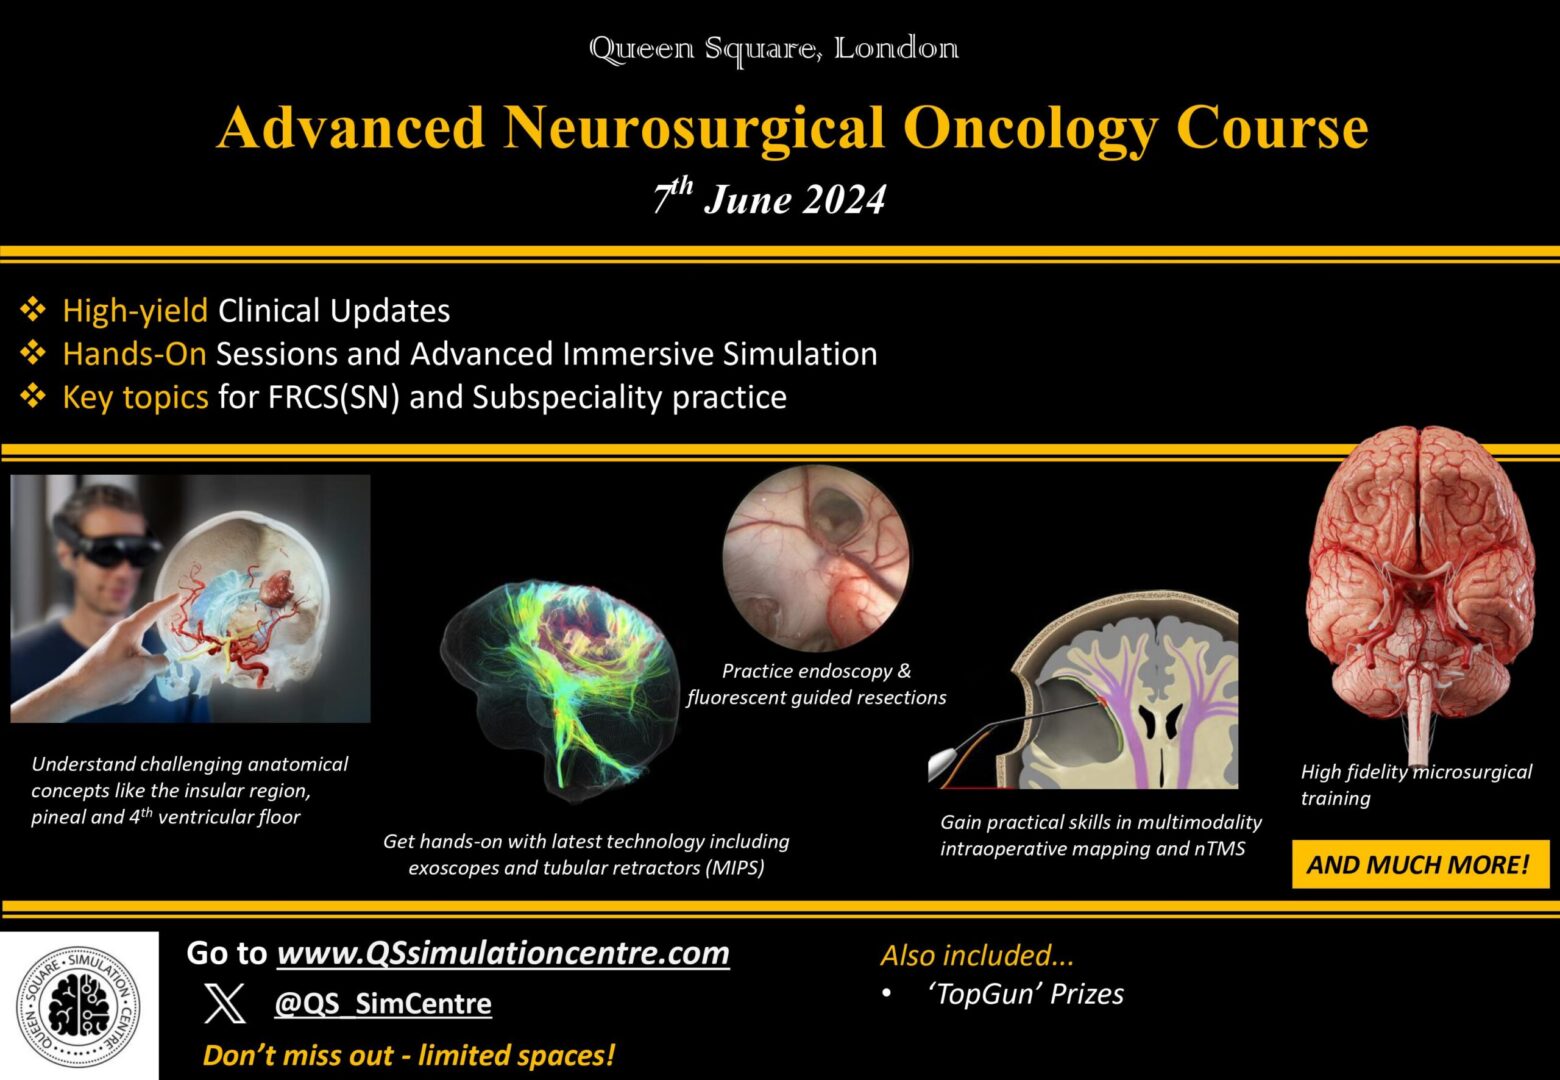 Advanced Neurosurgical Oncology Course